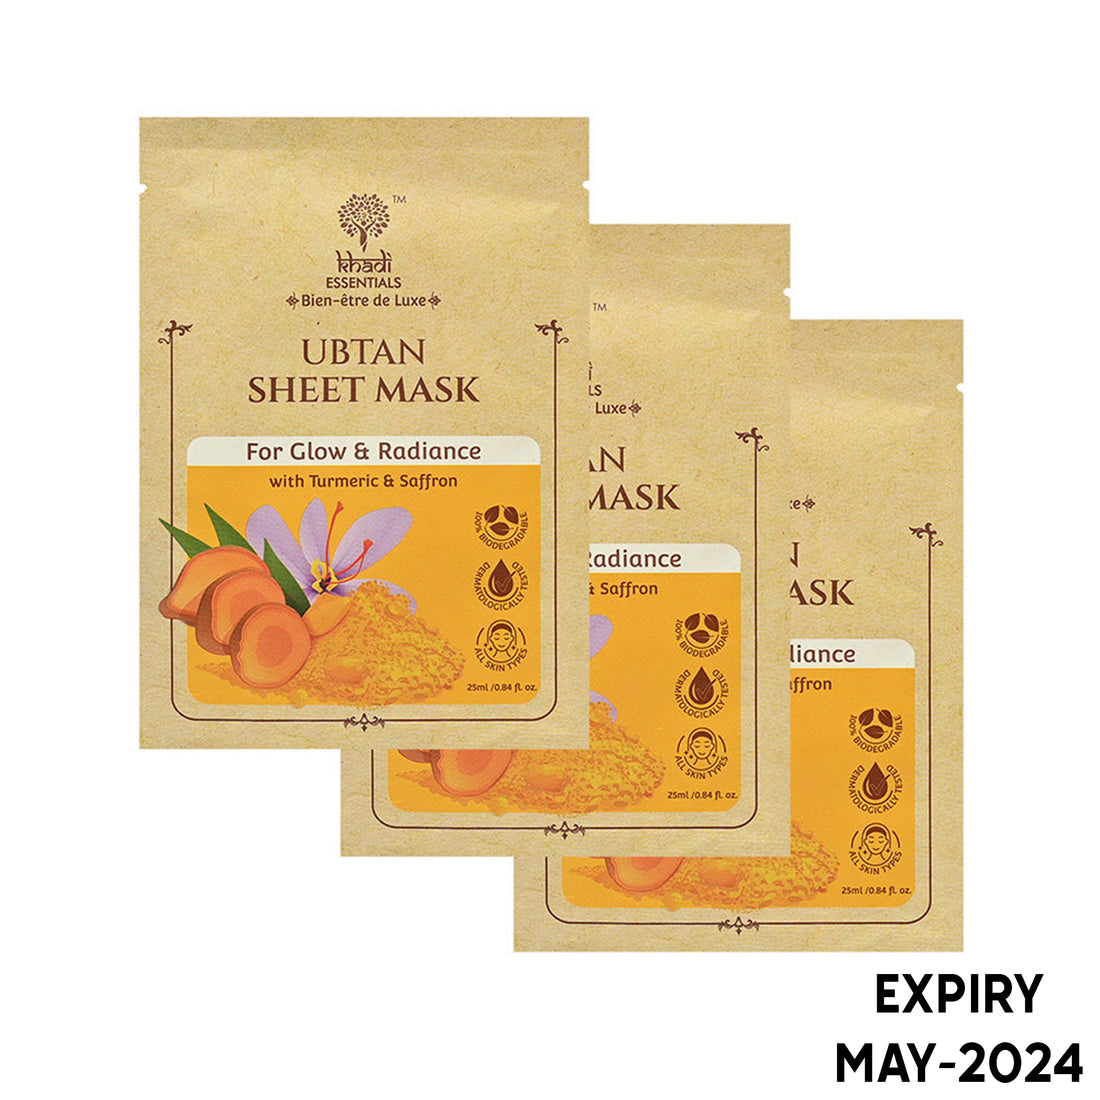 Khadi Essentials Ubtan Sheet Mask with Turmeric For Glow and Radiance (25ml) - Pack of 3